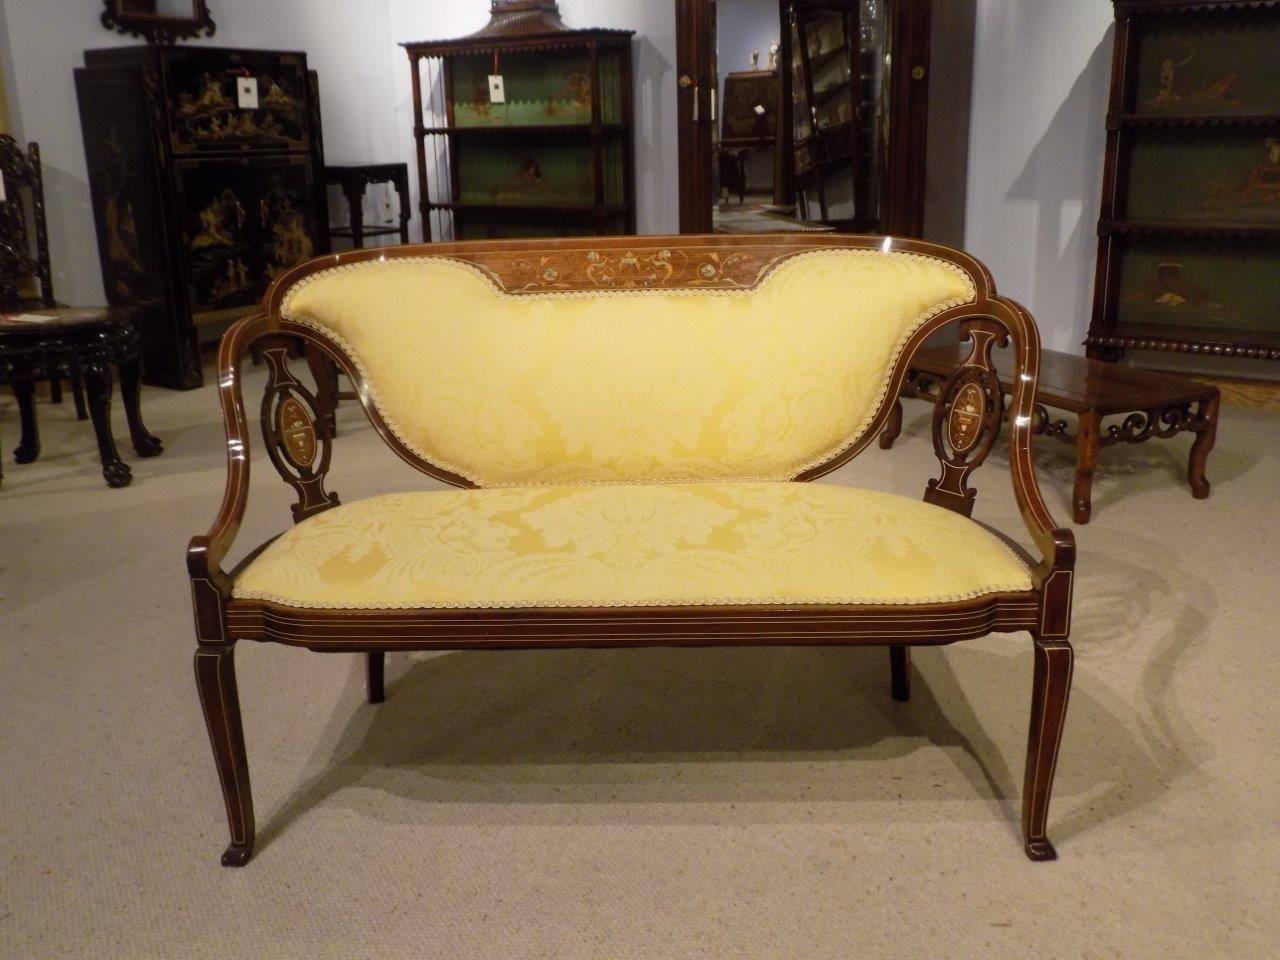 Fine Quality Mahogany, Rosewood and Marquetry Inlaid Edwardian Period Sofa 5